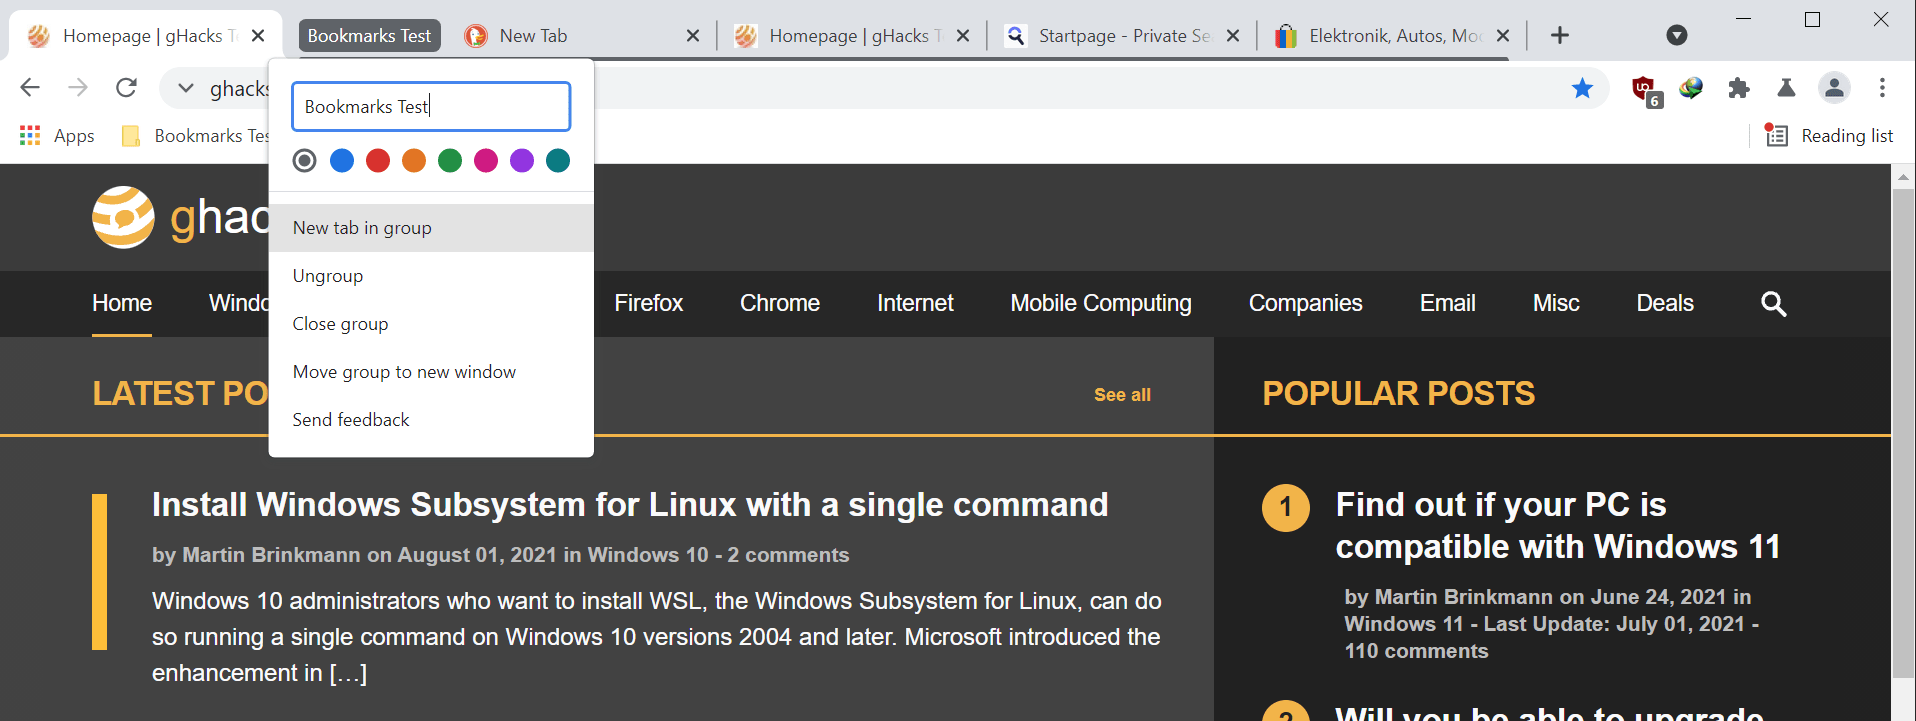 chrome open in tab group